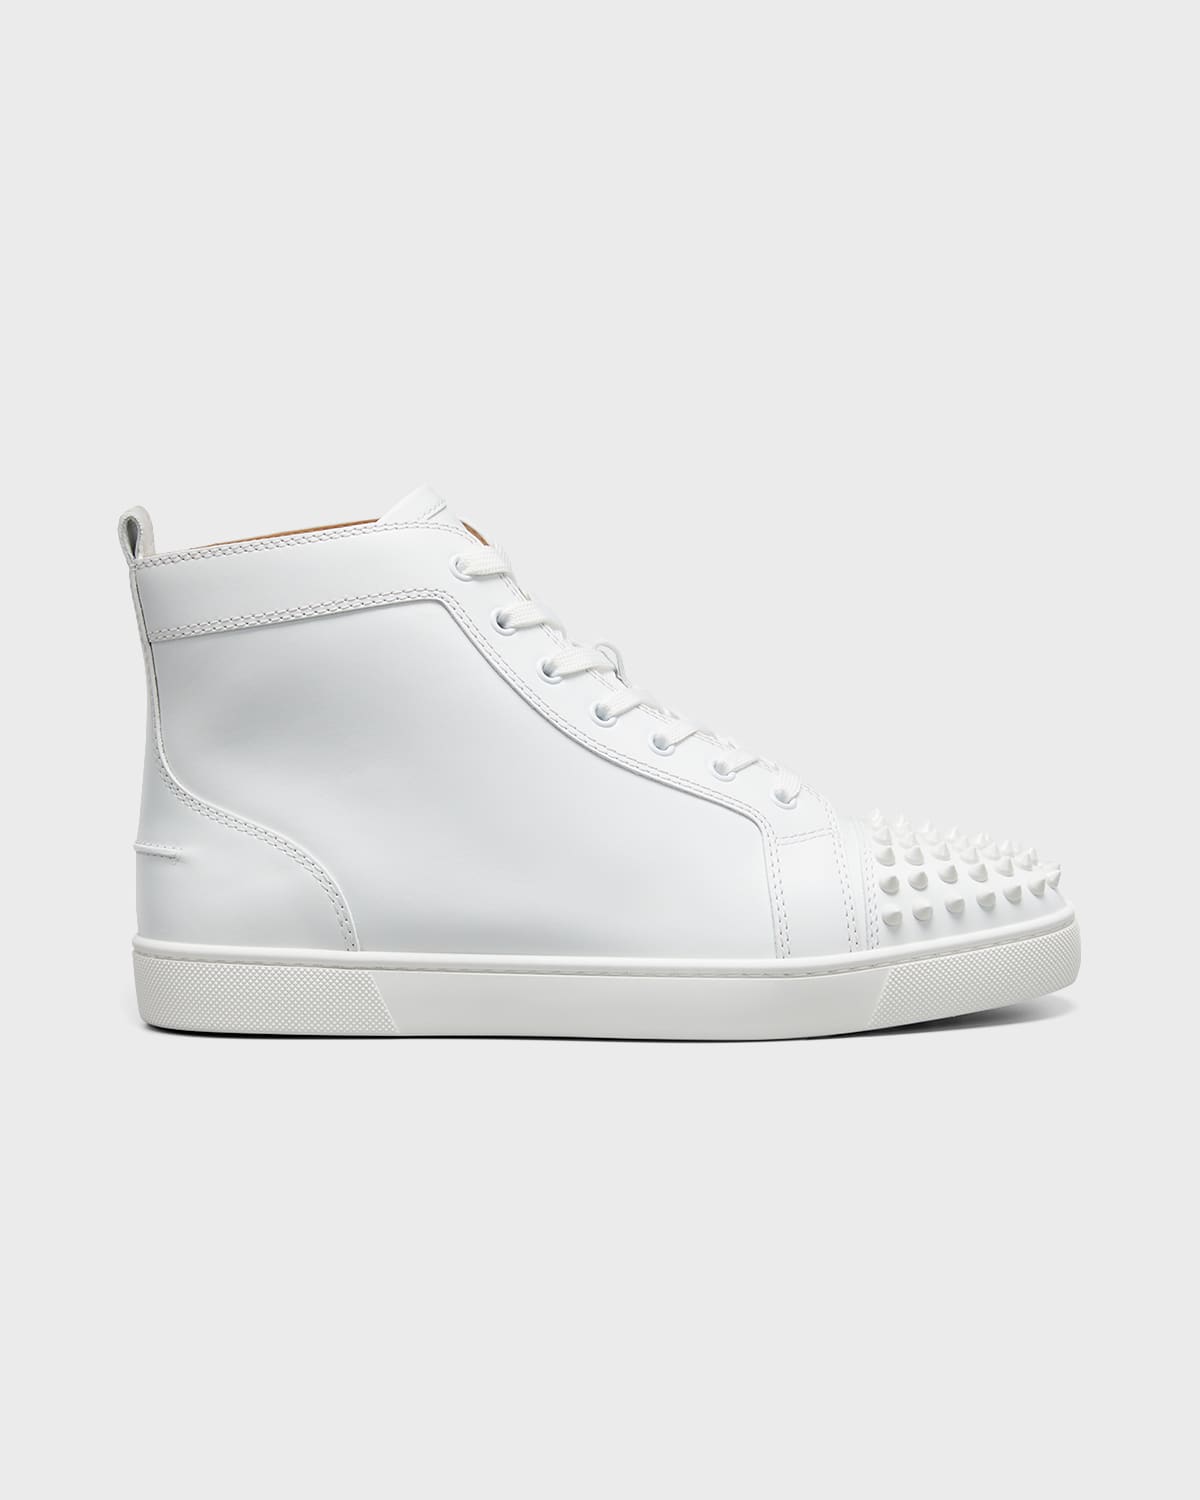 CHRISTIAN LOUBOUTIN MEN'S LOU SPIKES HIGH-TOP trainers,PROD218390283